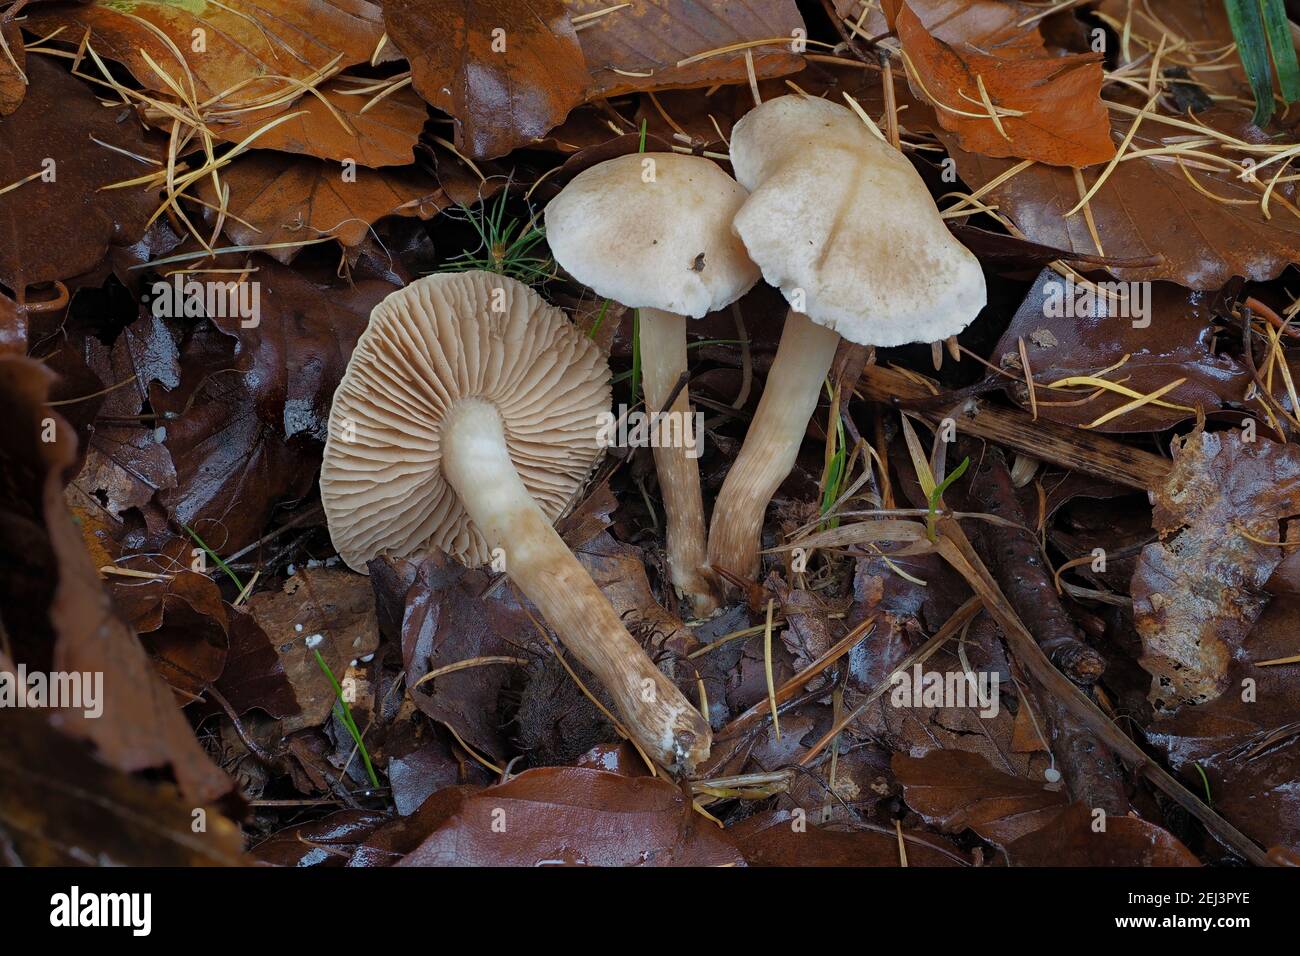 The Sweet Posionpie (Hebeloma saccariolens) is an inedible mushroom , an intresting photo Stock Photo